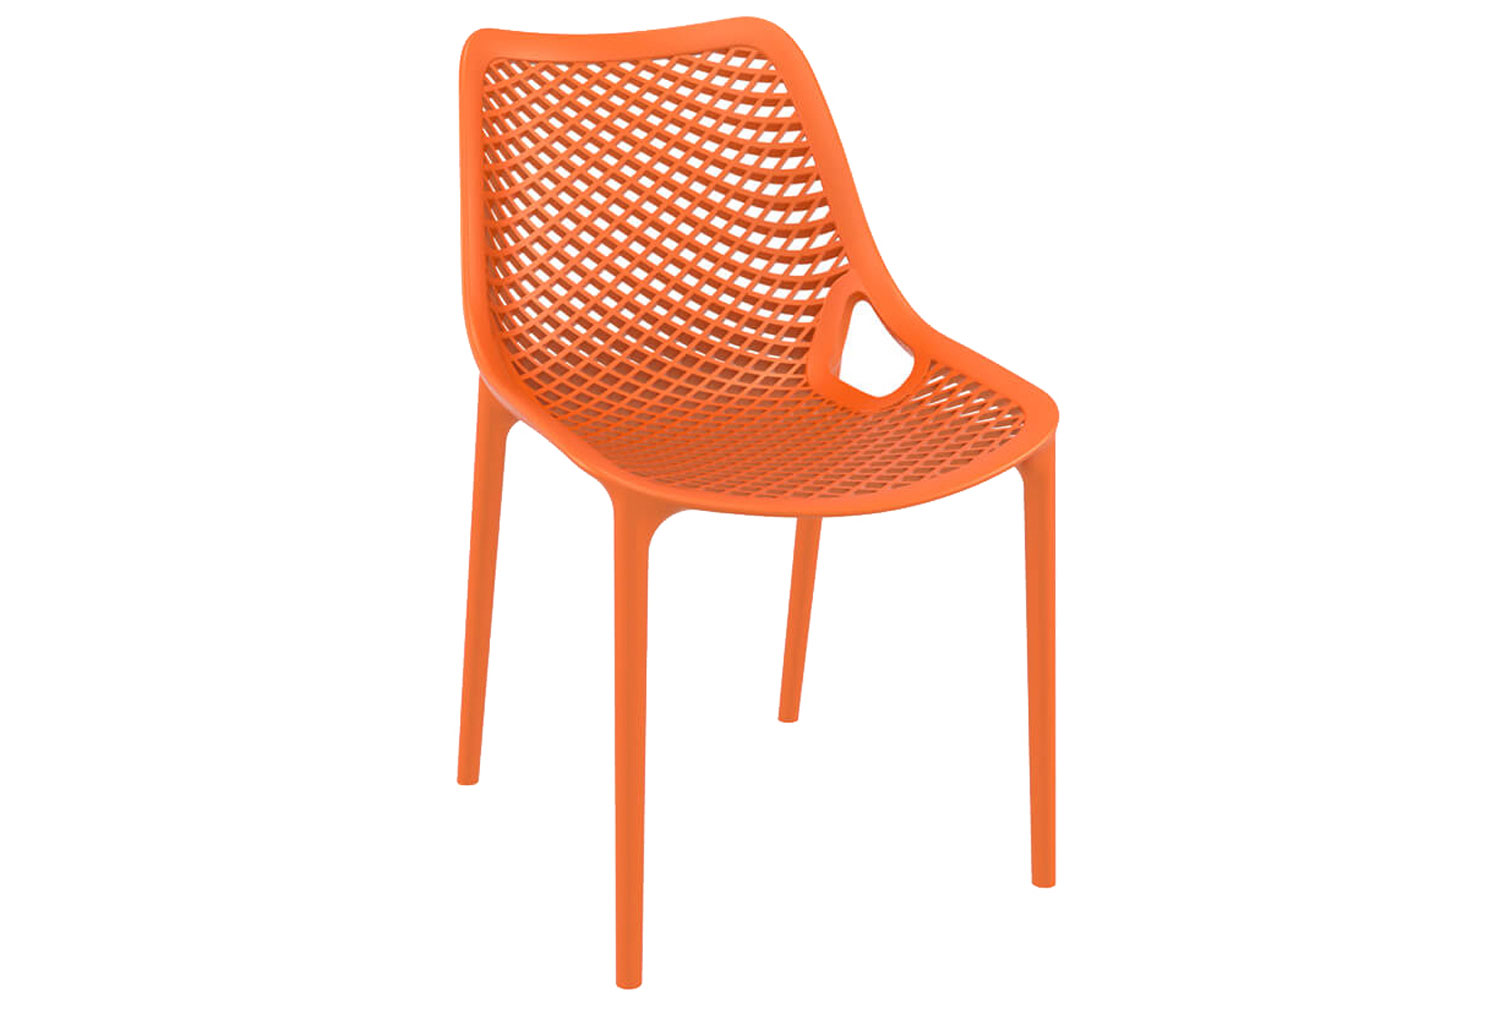 Qty 2 - Stawell Stacking Side Chair, Orange